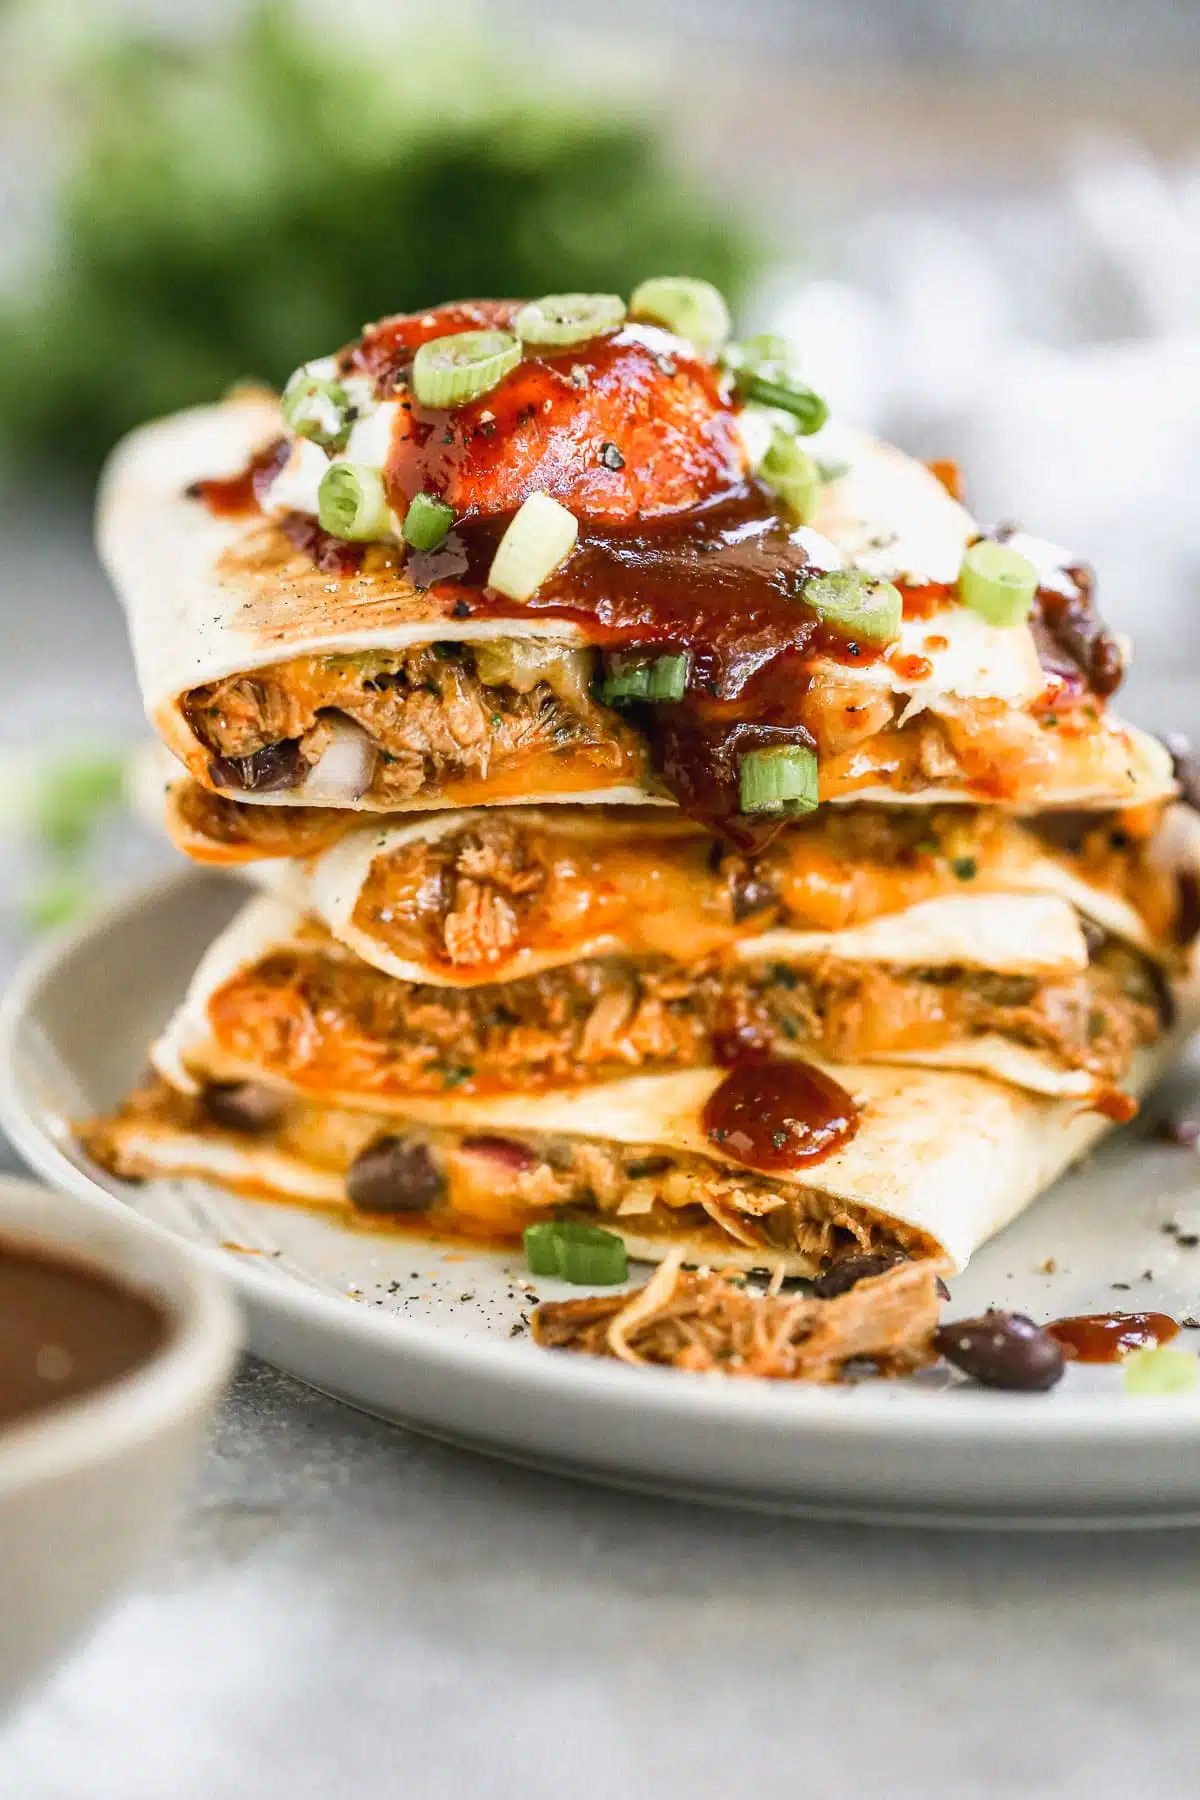 A stack of chicken enchiladas adorned with red sauce and chopped green onions rests on a white plate, surrounded by a blurred backdrop of fresh herbs.